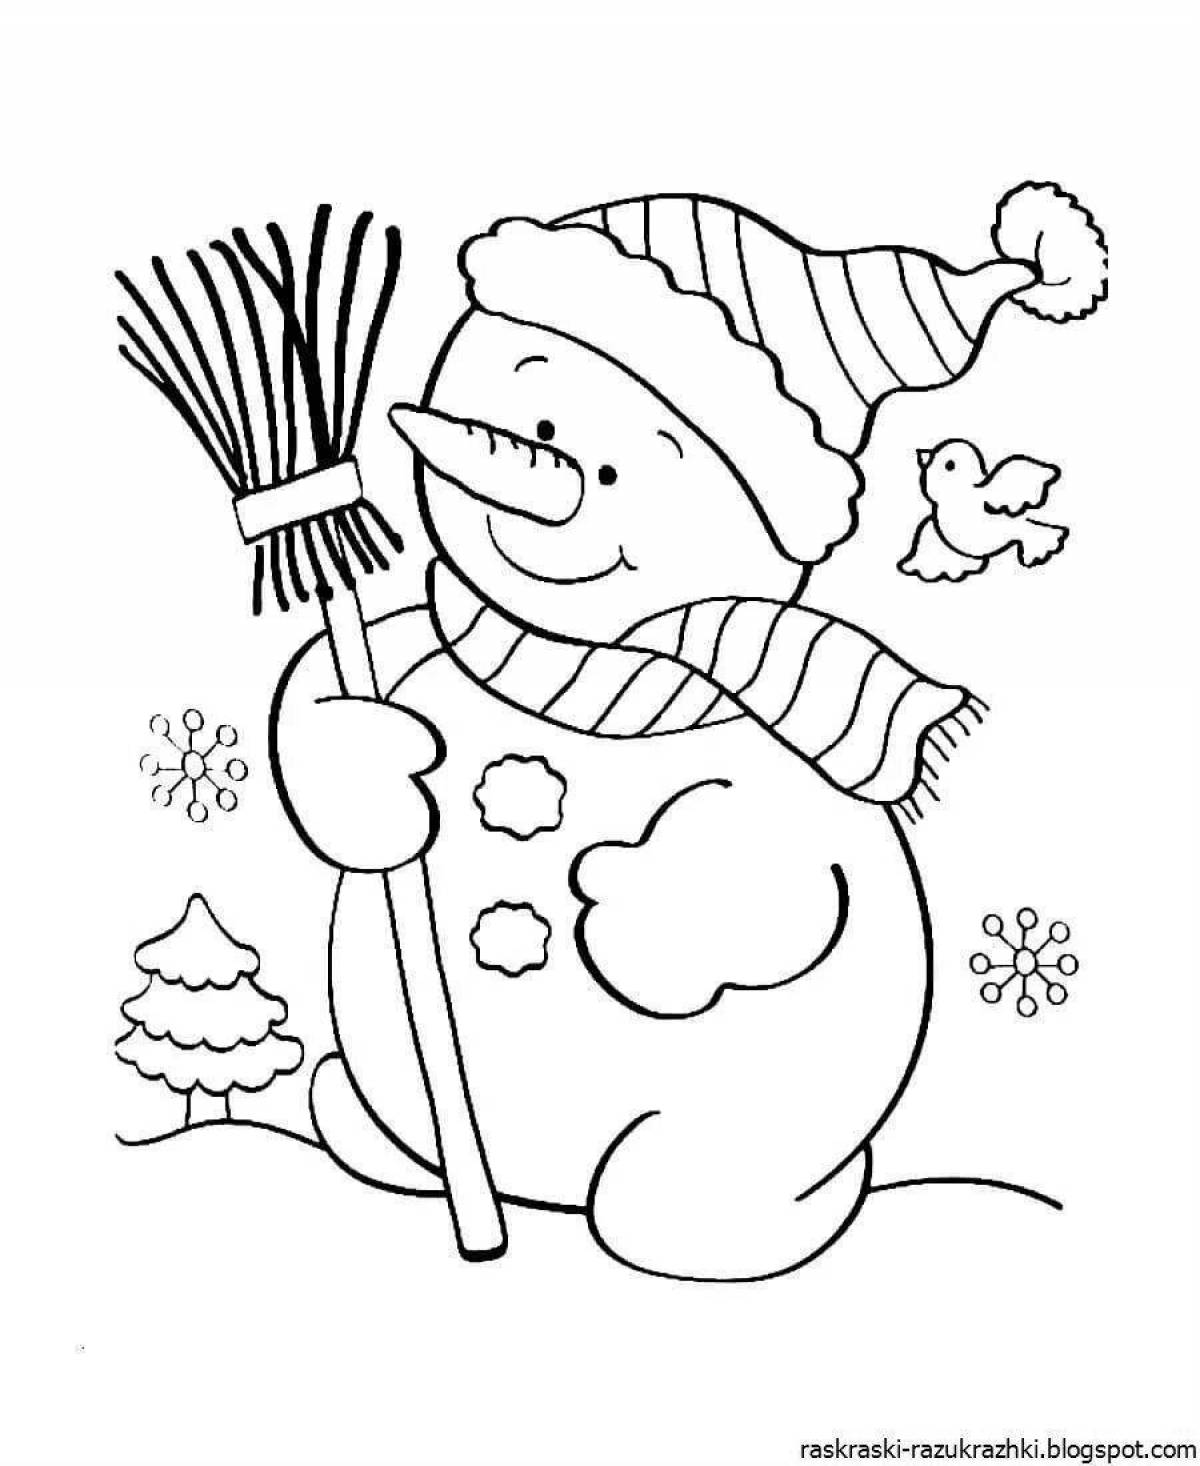 Fun drawing of a snowman for kids